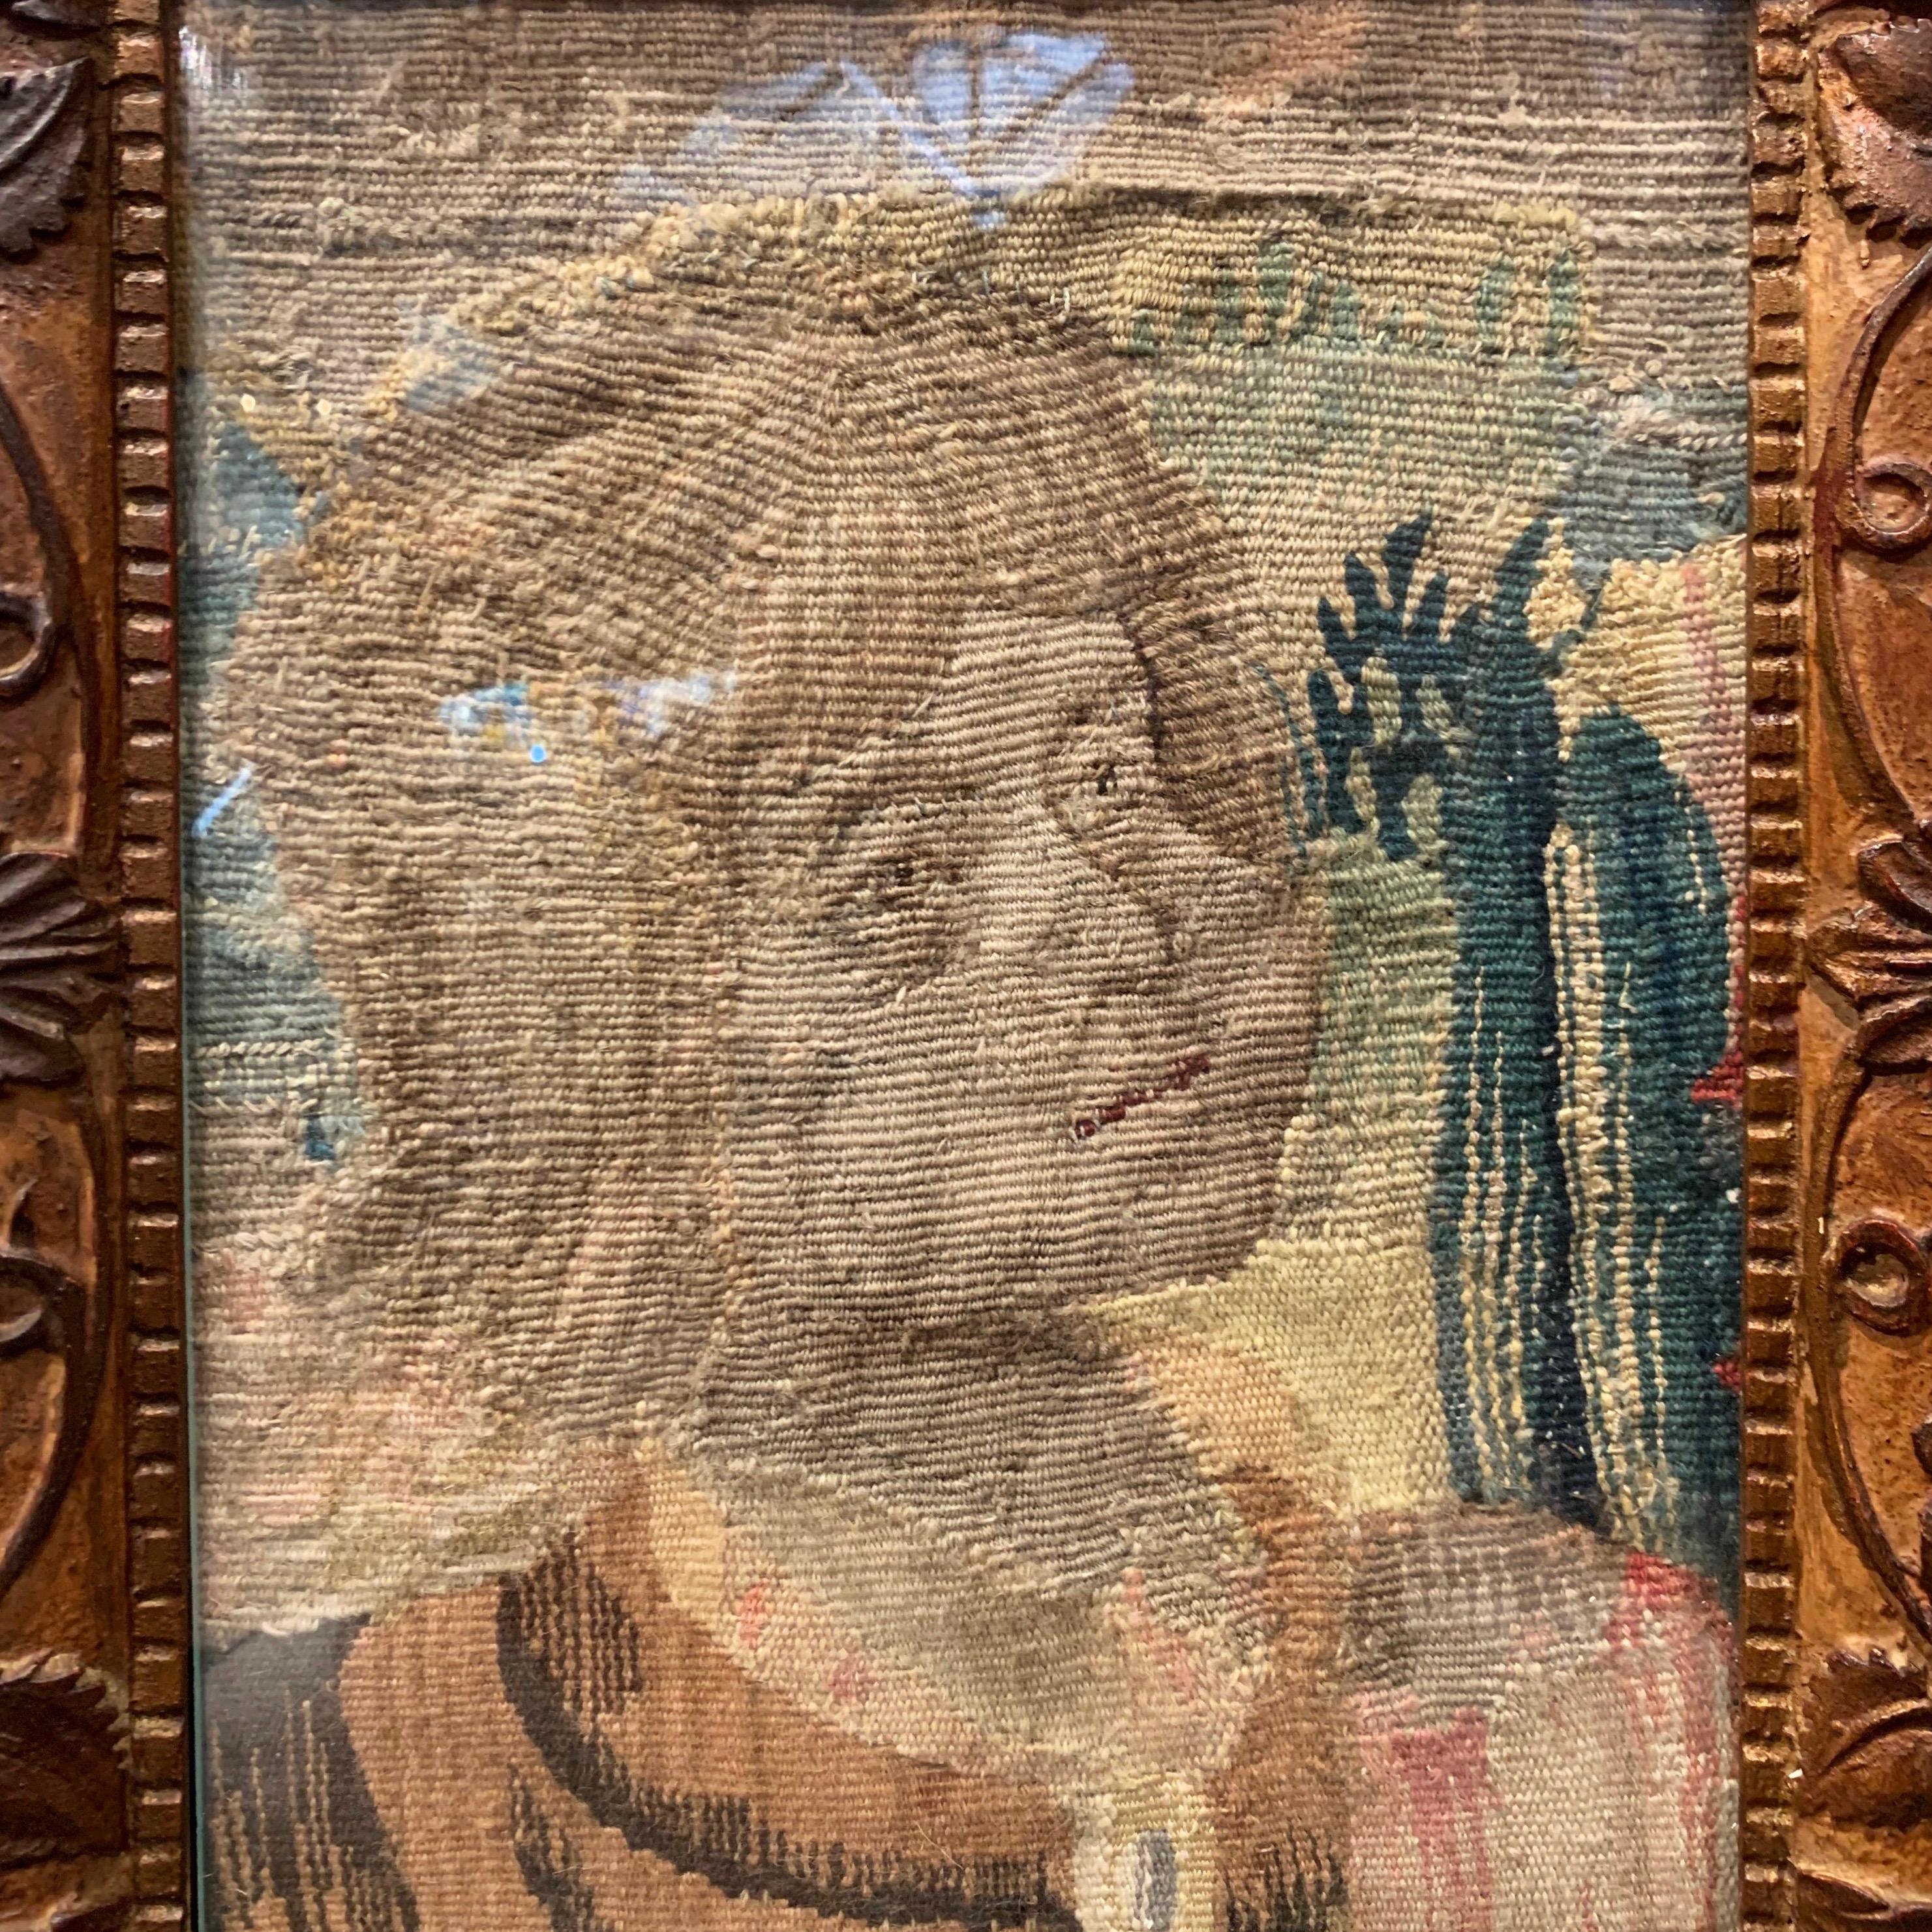 Set in a carved frame embellished with floral motifs, and protected with glass, the antique Aubusson fragment probably represents Joan of Arc at an early age. The wall decor is in excellent condition with rich colors on the beige, blue and brown